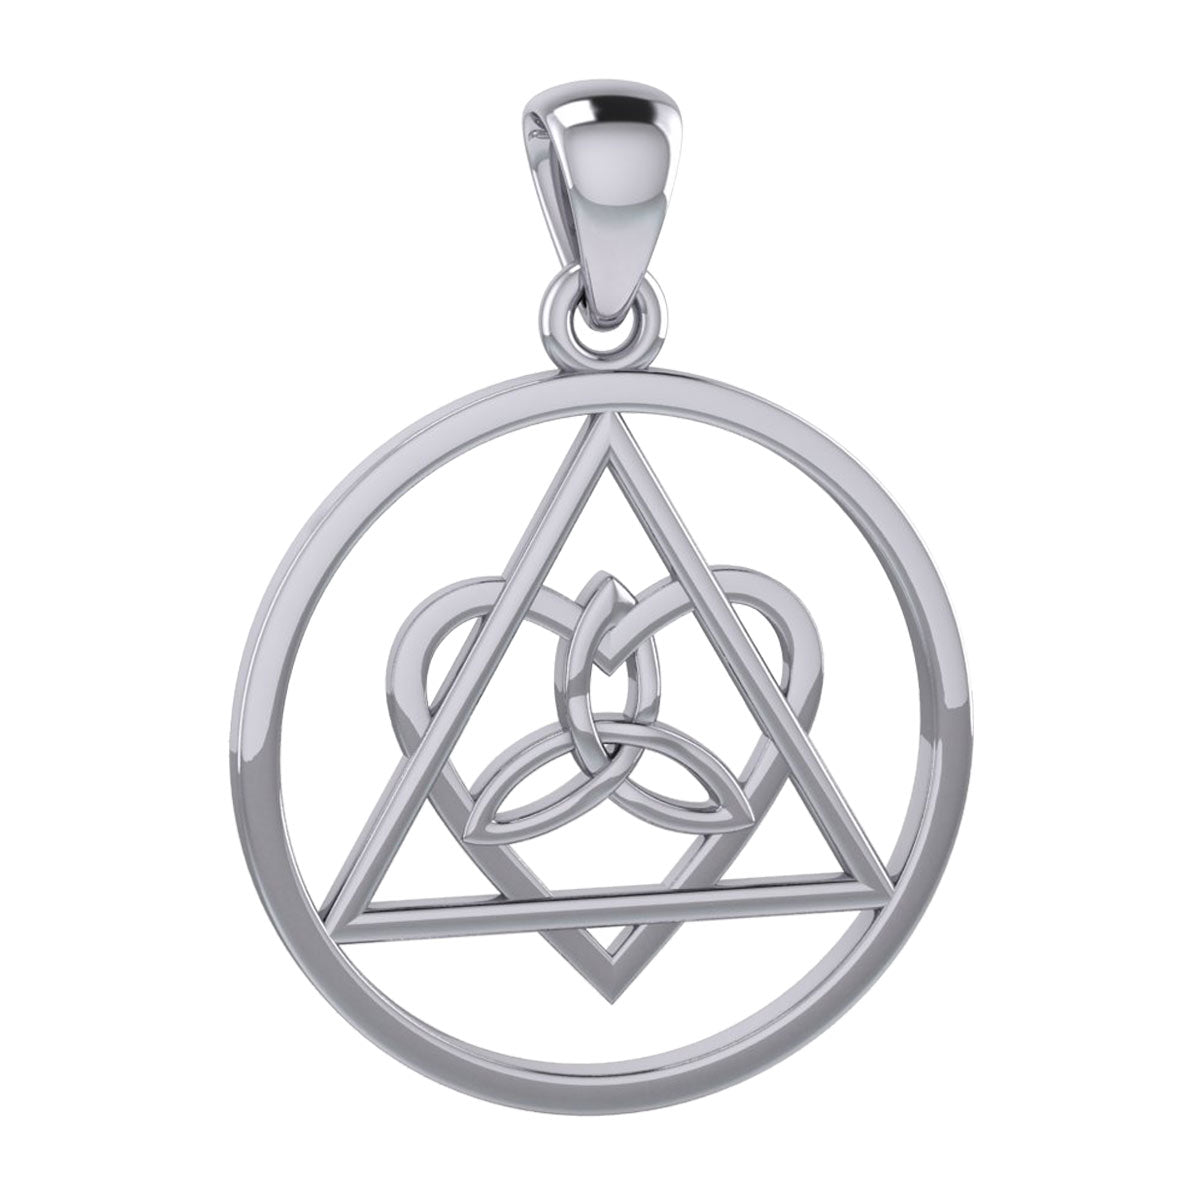 Large Celtic AA Symbol Sterling Silver Pendant Jewelry TPD6004